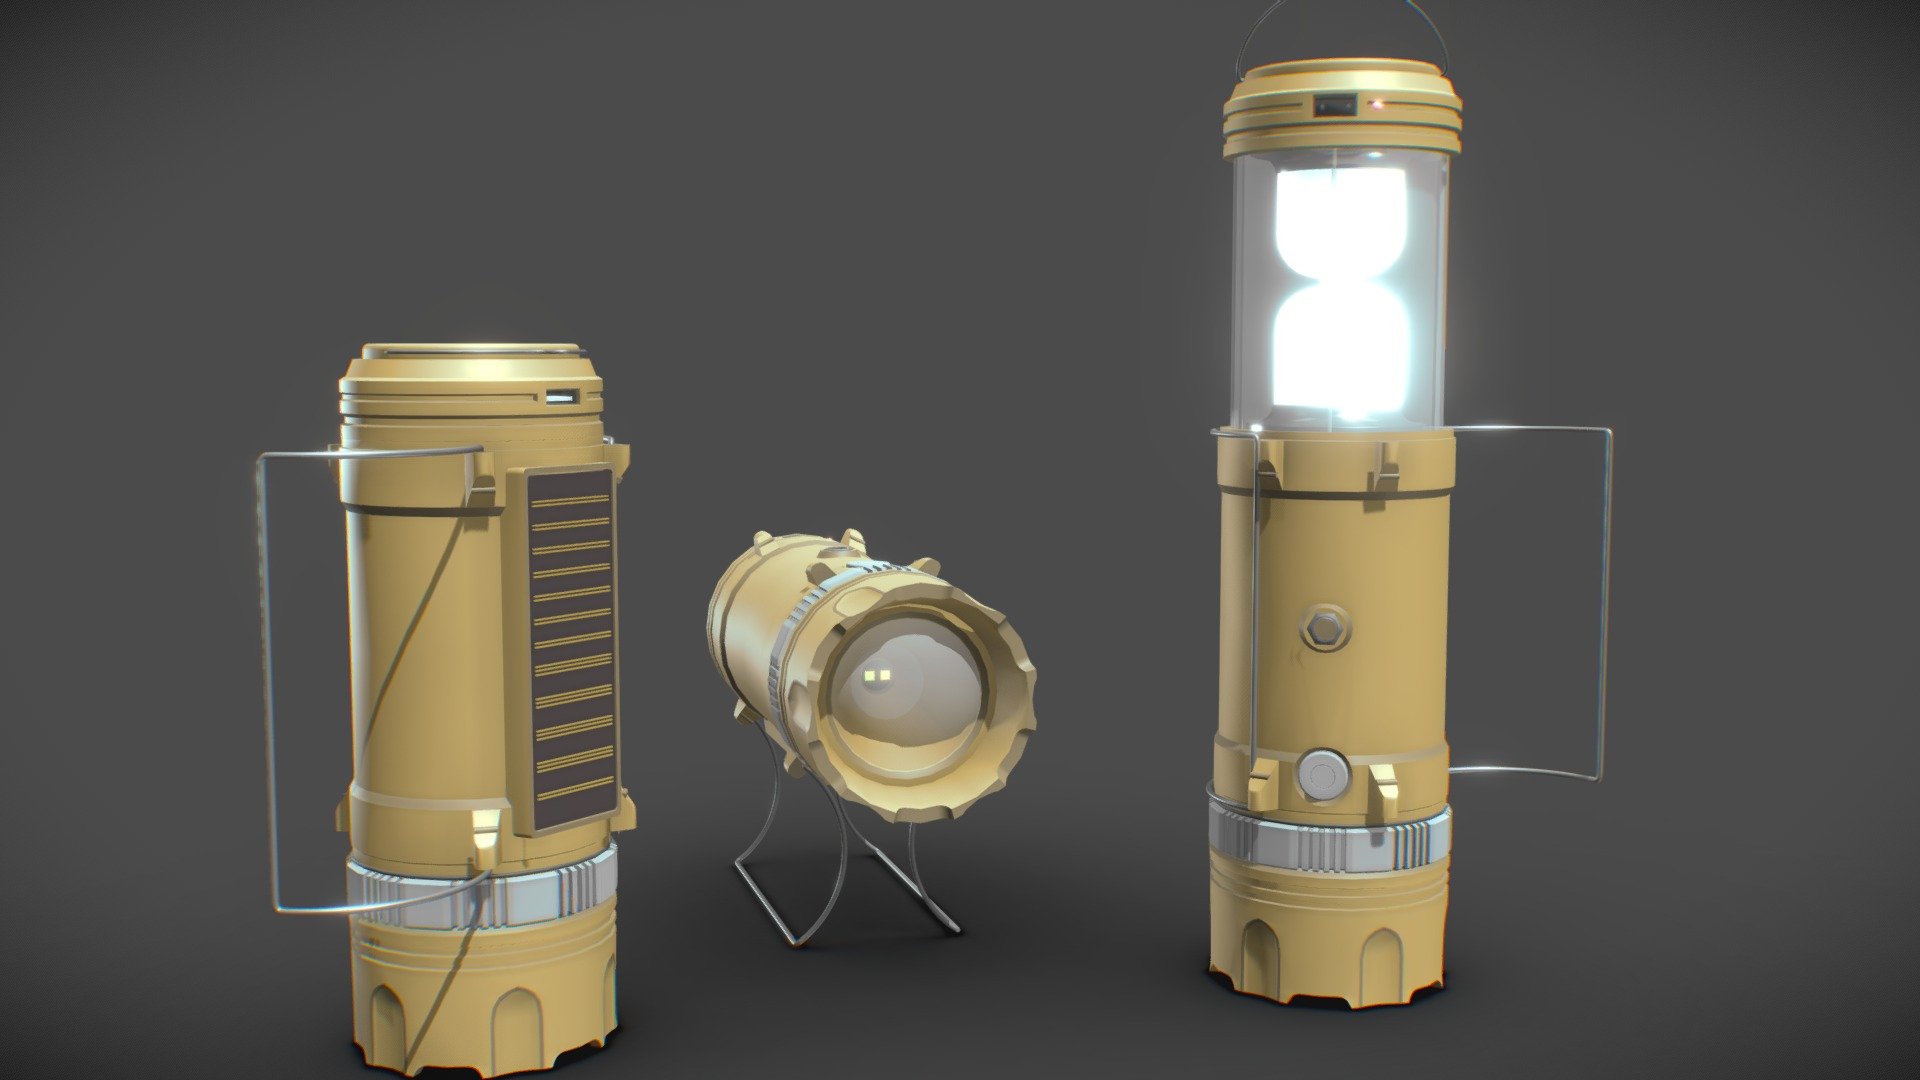 Lesson 6 (2/3) - Draft Camping lamp in Draft Punk 4.0 from XYZ School. Student - SPIN4T(Max/Maya) thx:3

This model after texturing:
https://skfb.ly/o7Knr
https://www.artstation.com/artwork/9mGwGN - Camping lamp. XYZ School HW. DP_4 - Download Free 3D model by maksim.shalata 3d model